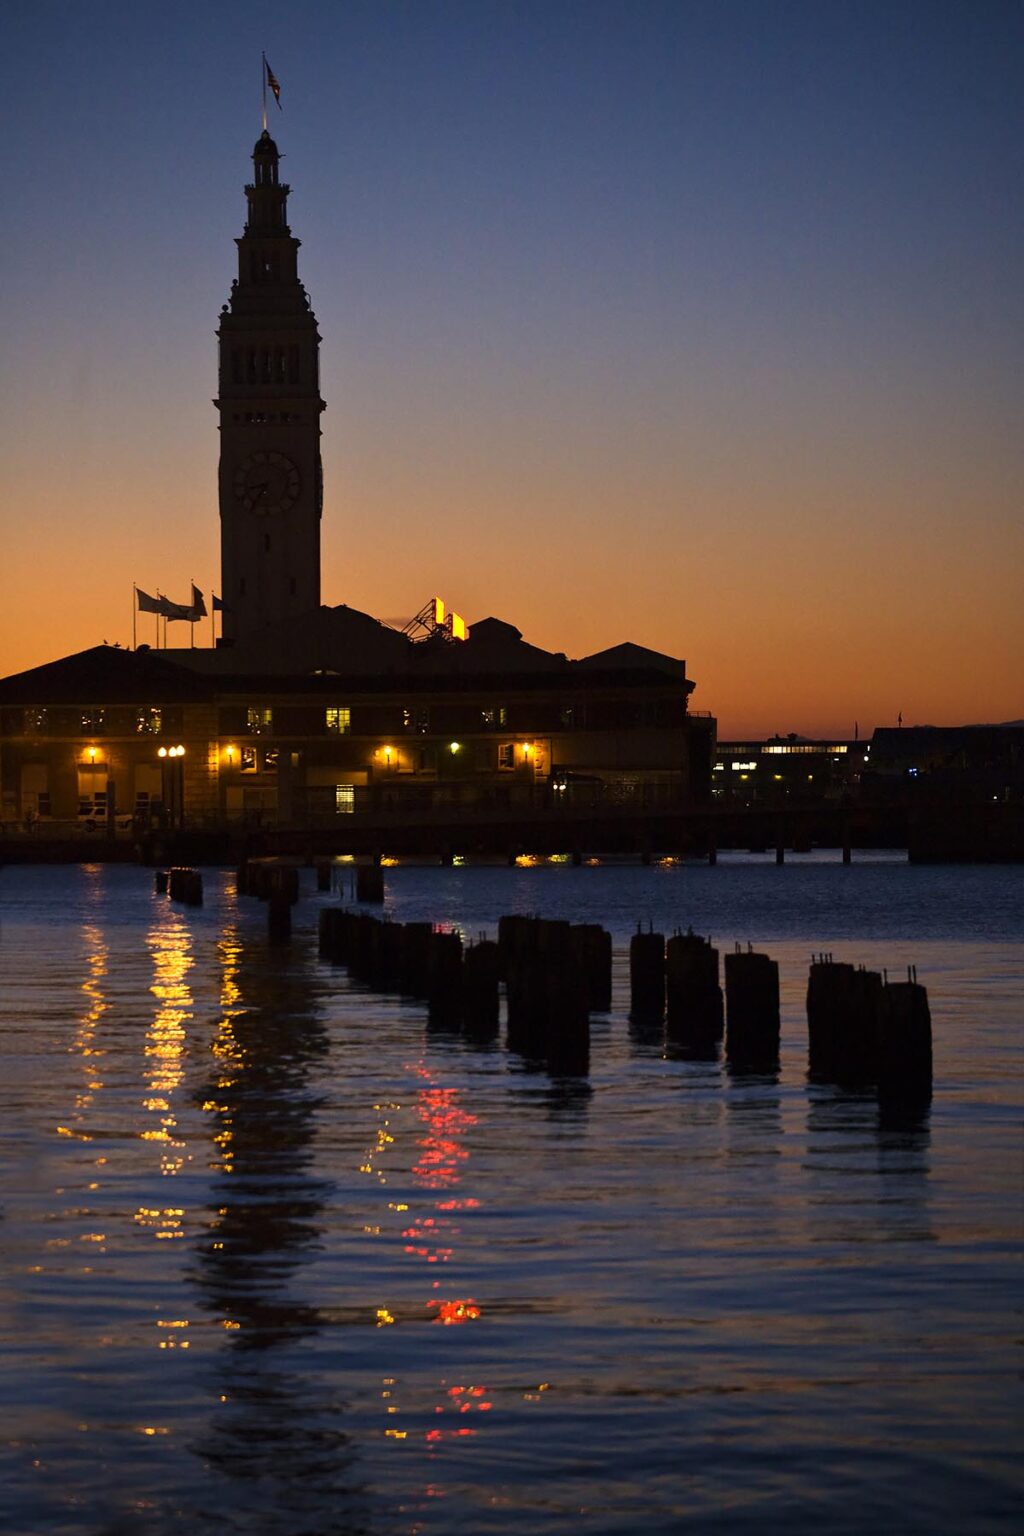 The FERRY BUILDING MARKETPLACE at sunset along THE EMBARCADERO - SAN FRANCISCO, CALIFORNIA